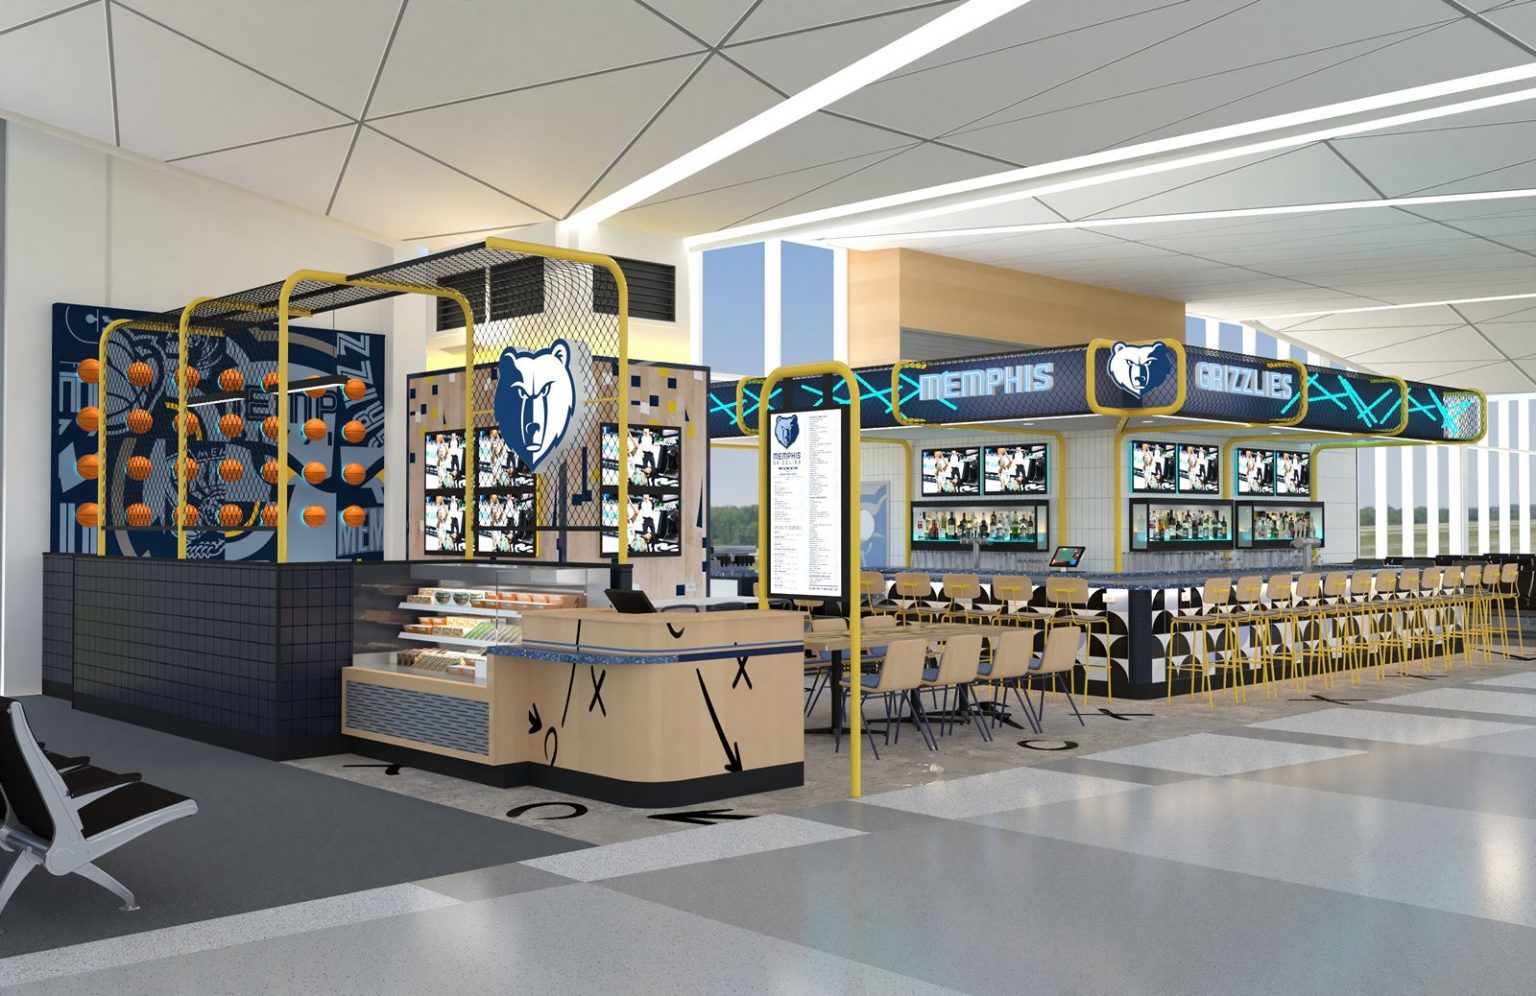 HMS Host Selects Harrison as Architect for Airport Dining Concepts